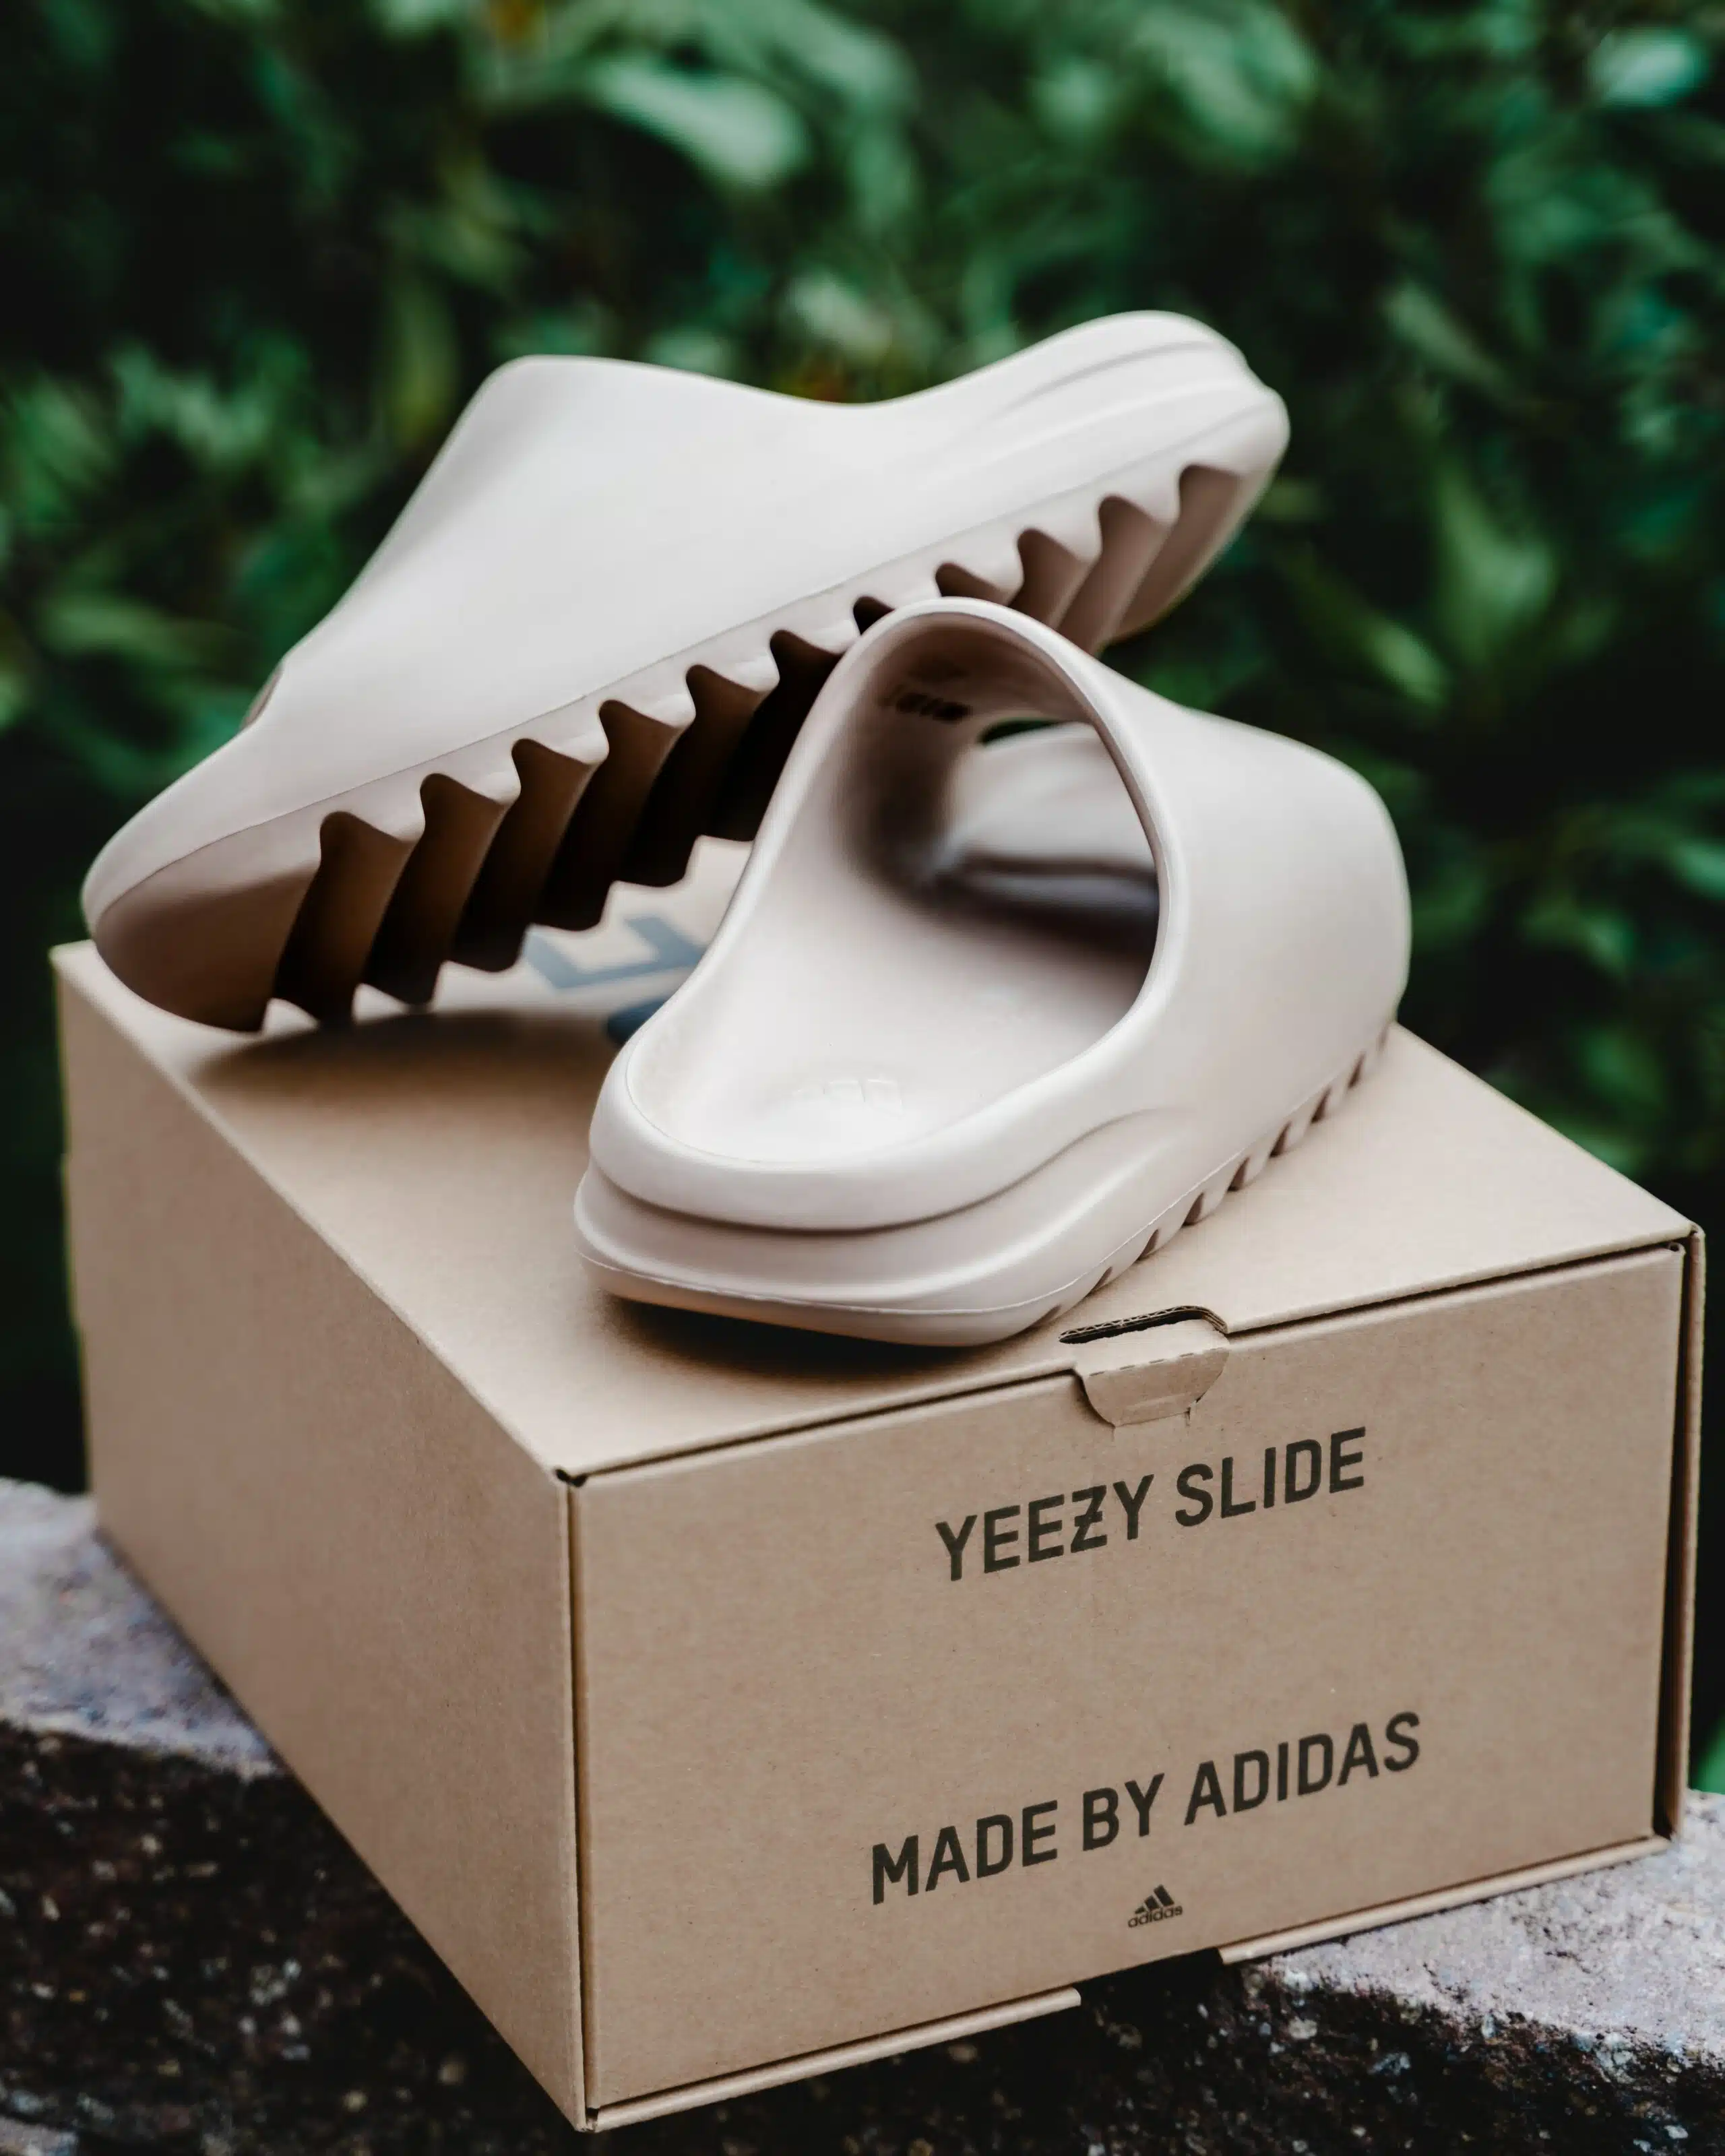 Top 7 Yeezy Slides dupes, by fashion blogger What The Fab